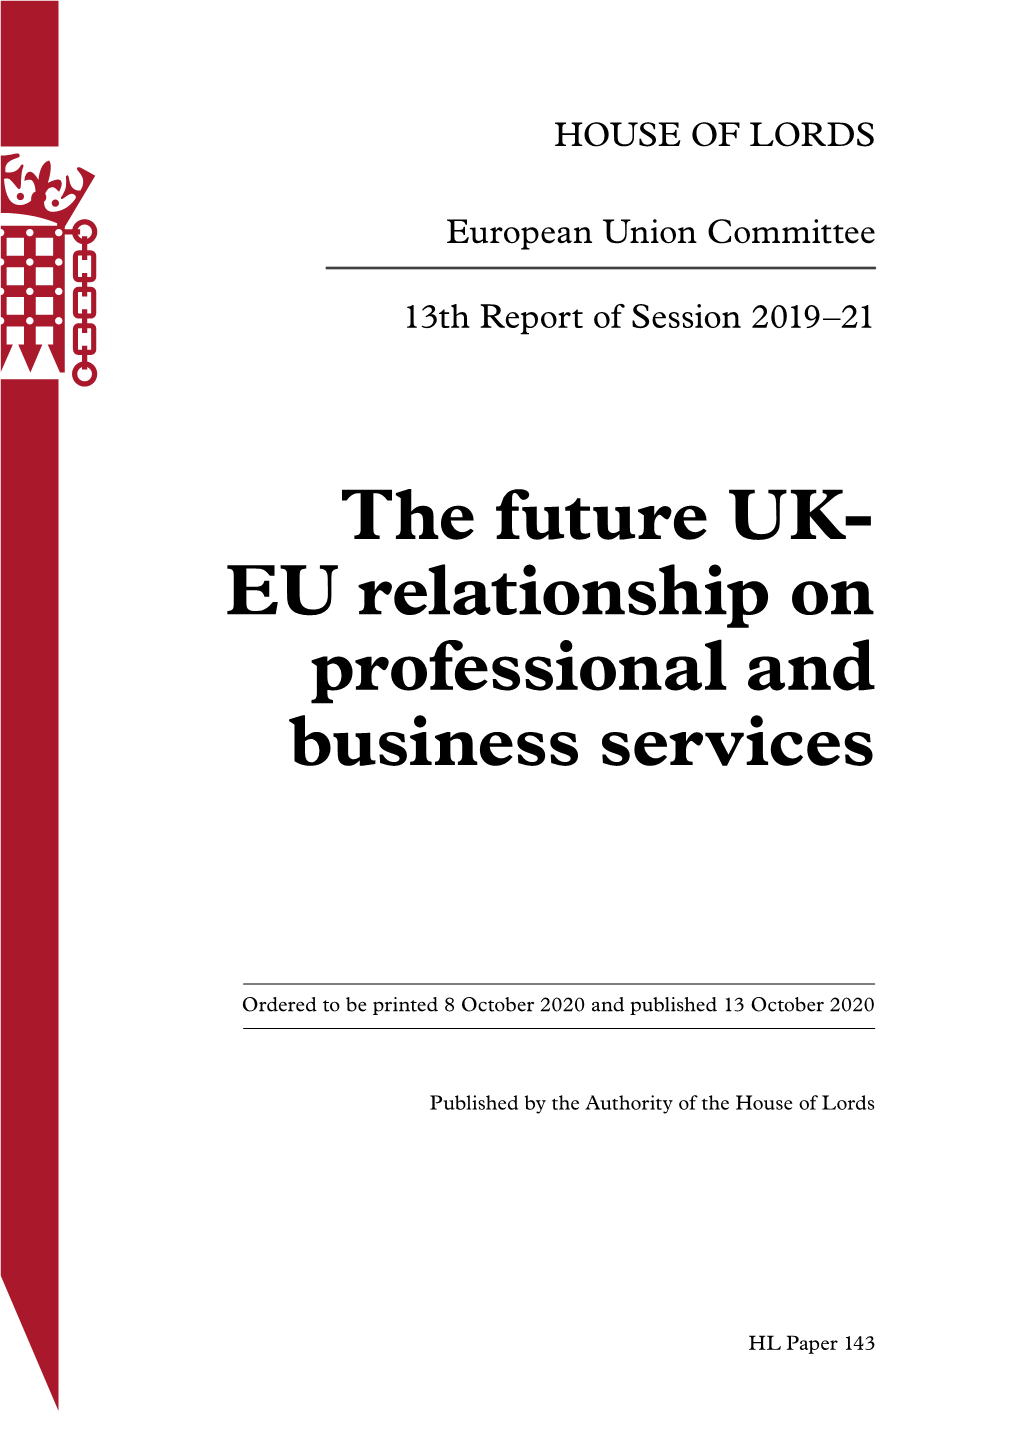 The Future UK-EU Relationship on Professional and Business Services 3